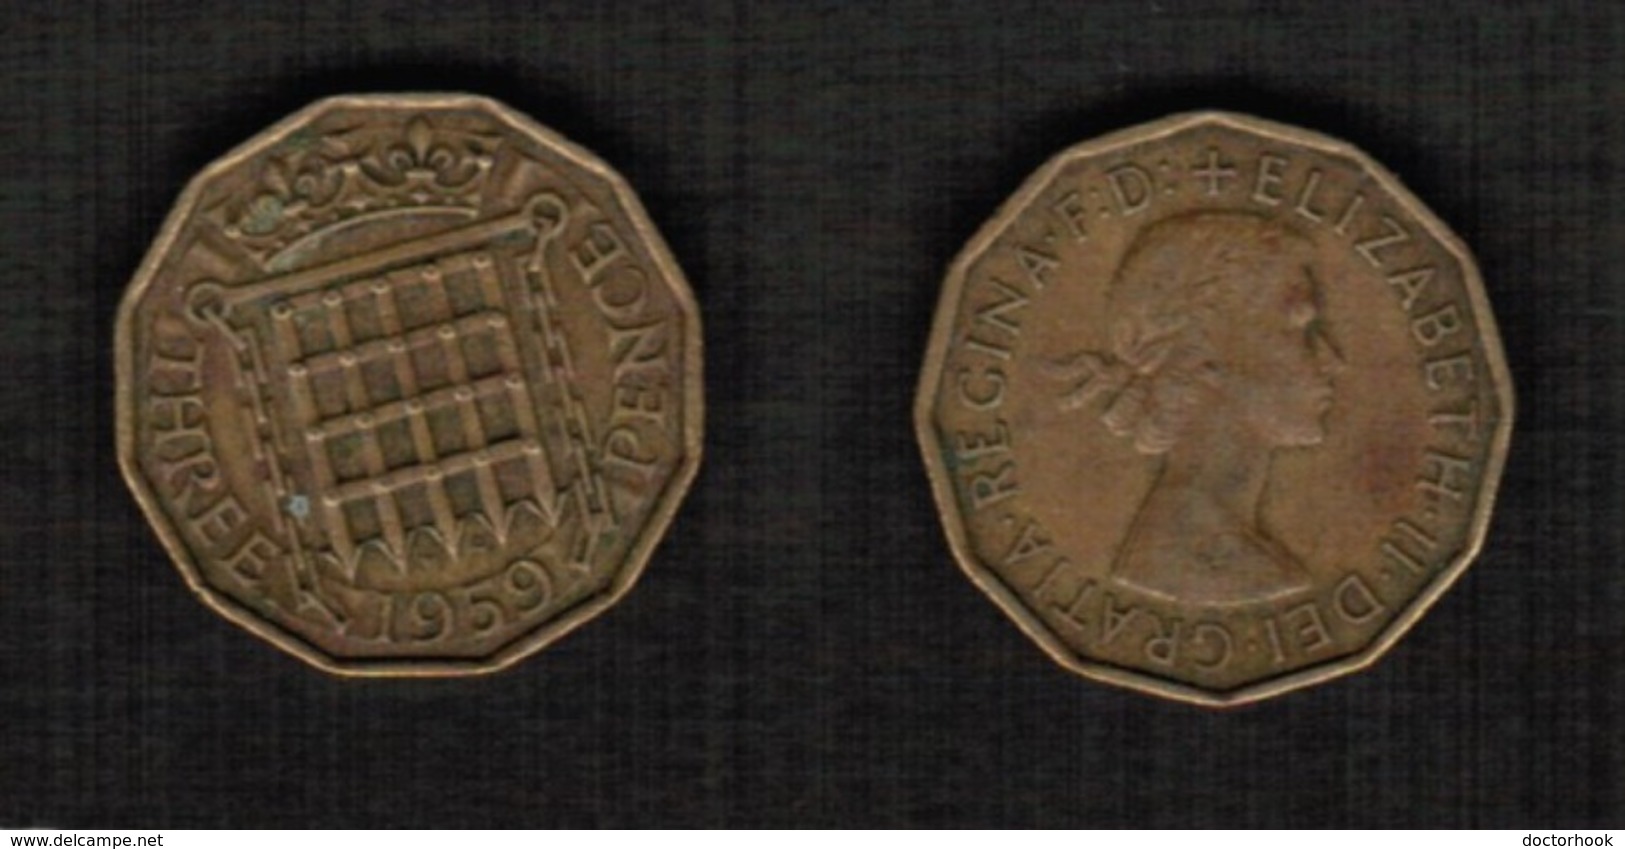 GREAT BRITAIN  3 PENCE 1959 (KM # 900) #5560 - F. 3 Pence